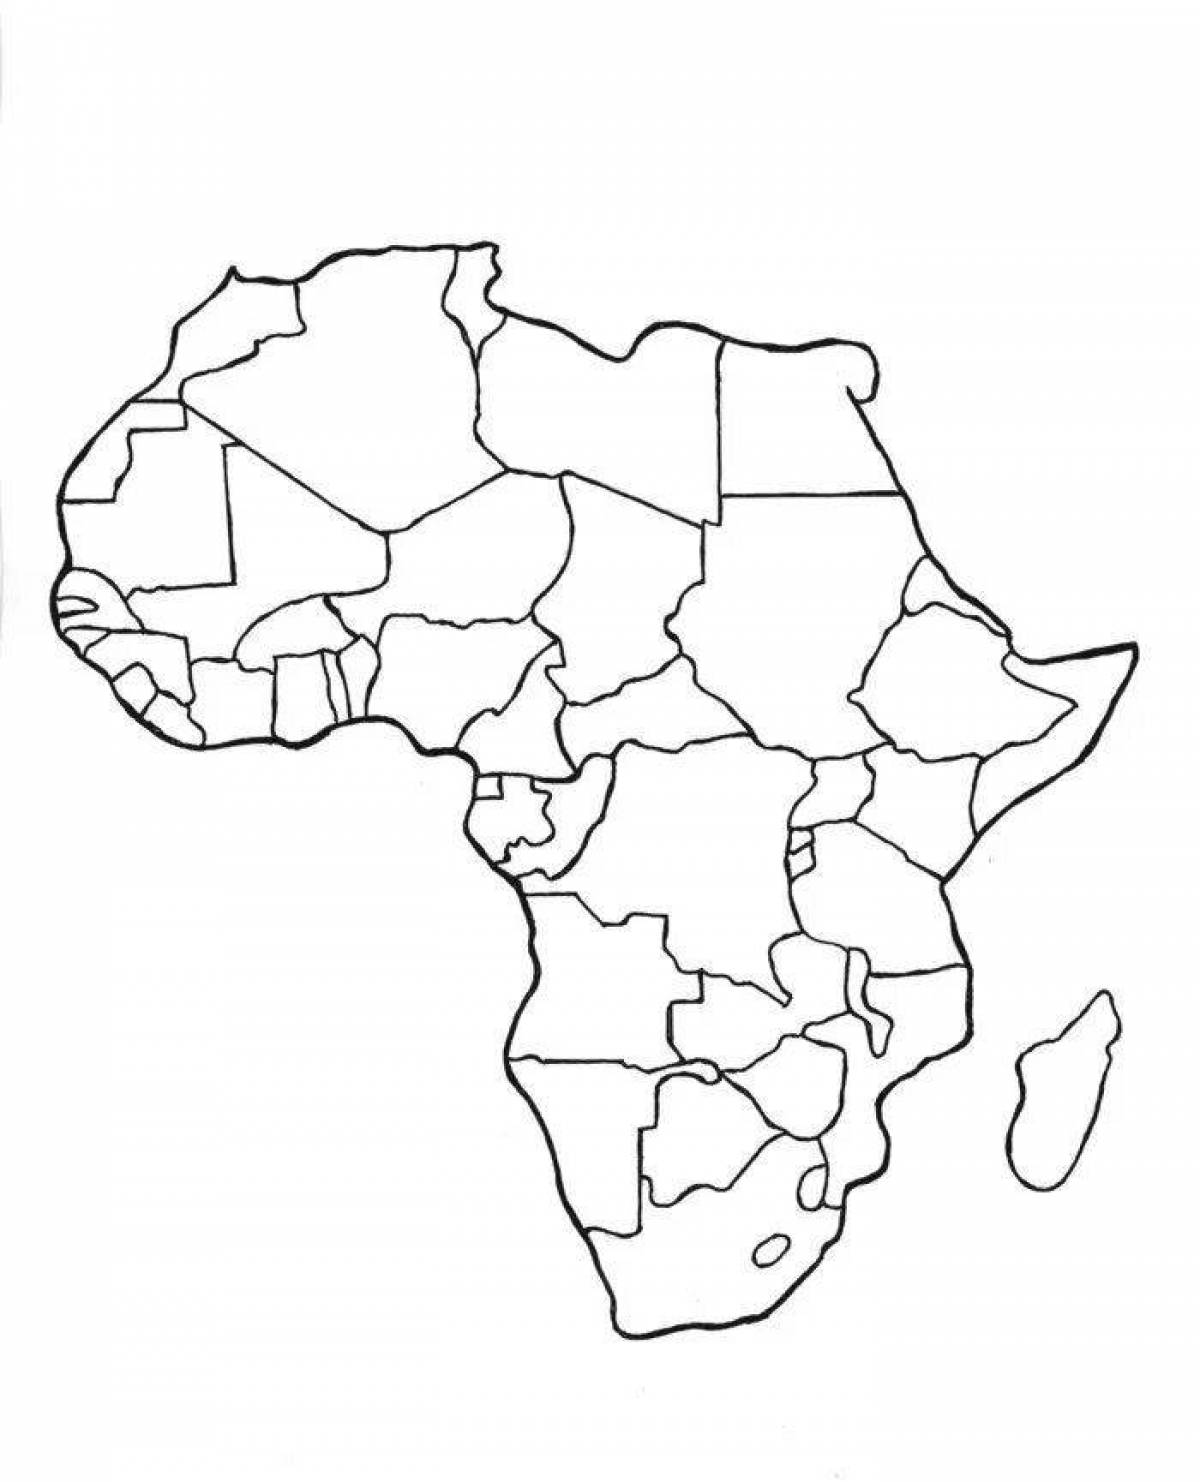 Distinctive africa map coloring page